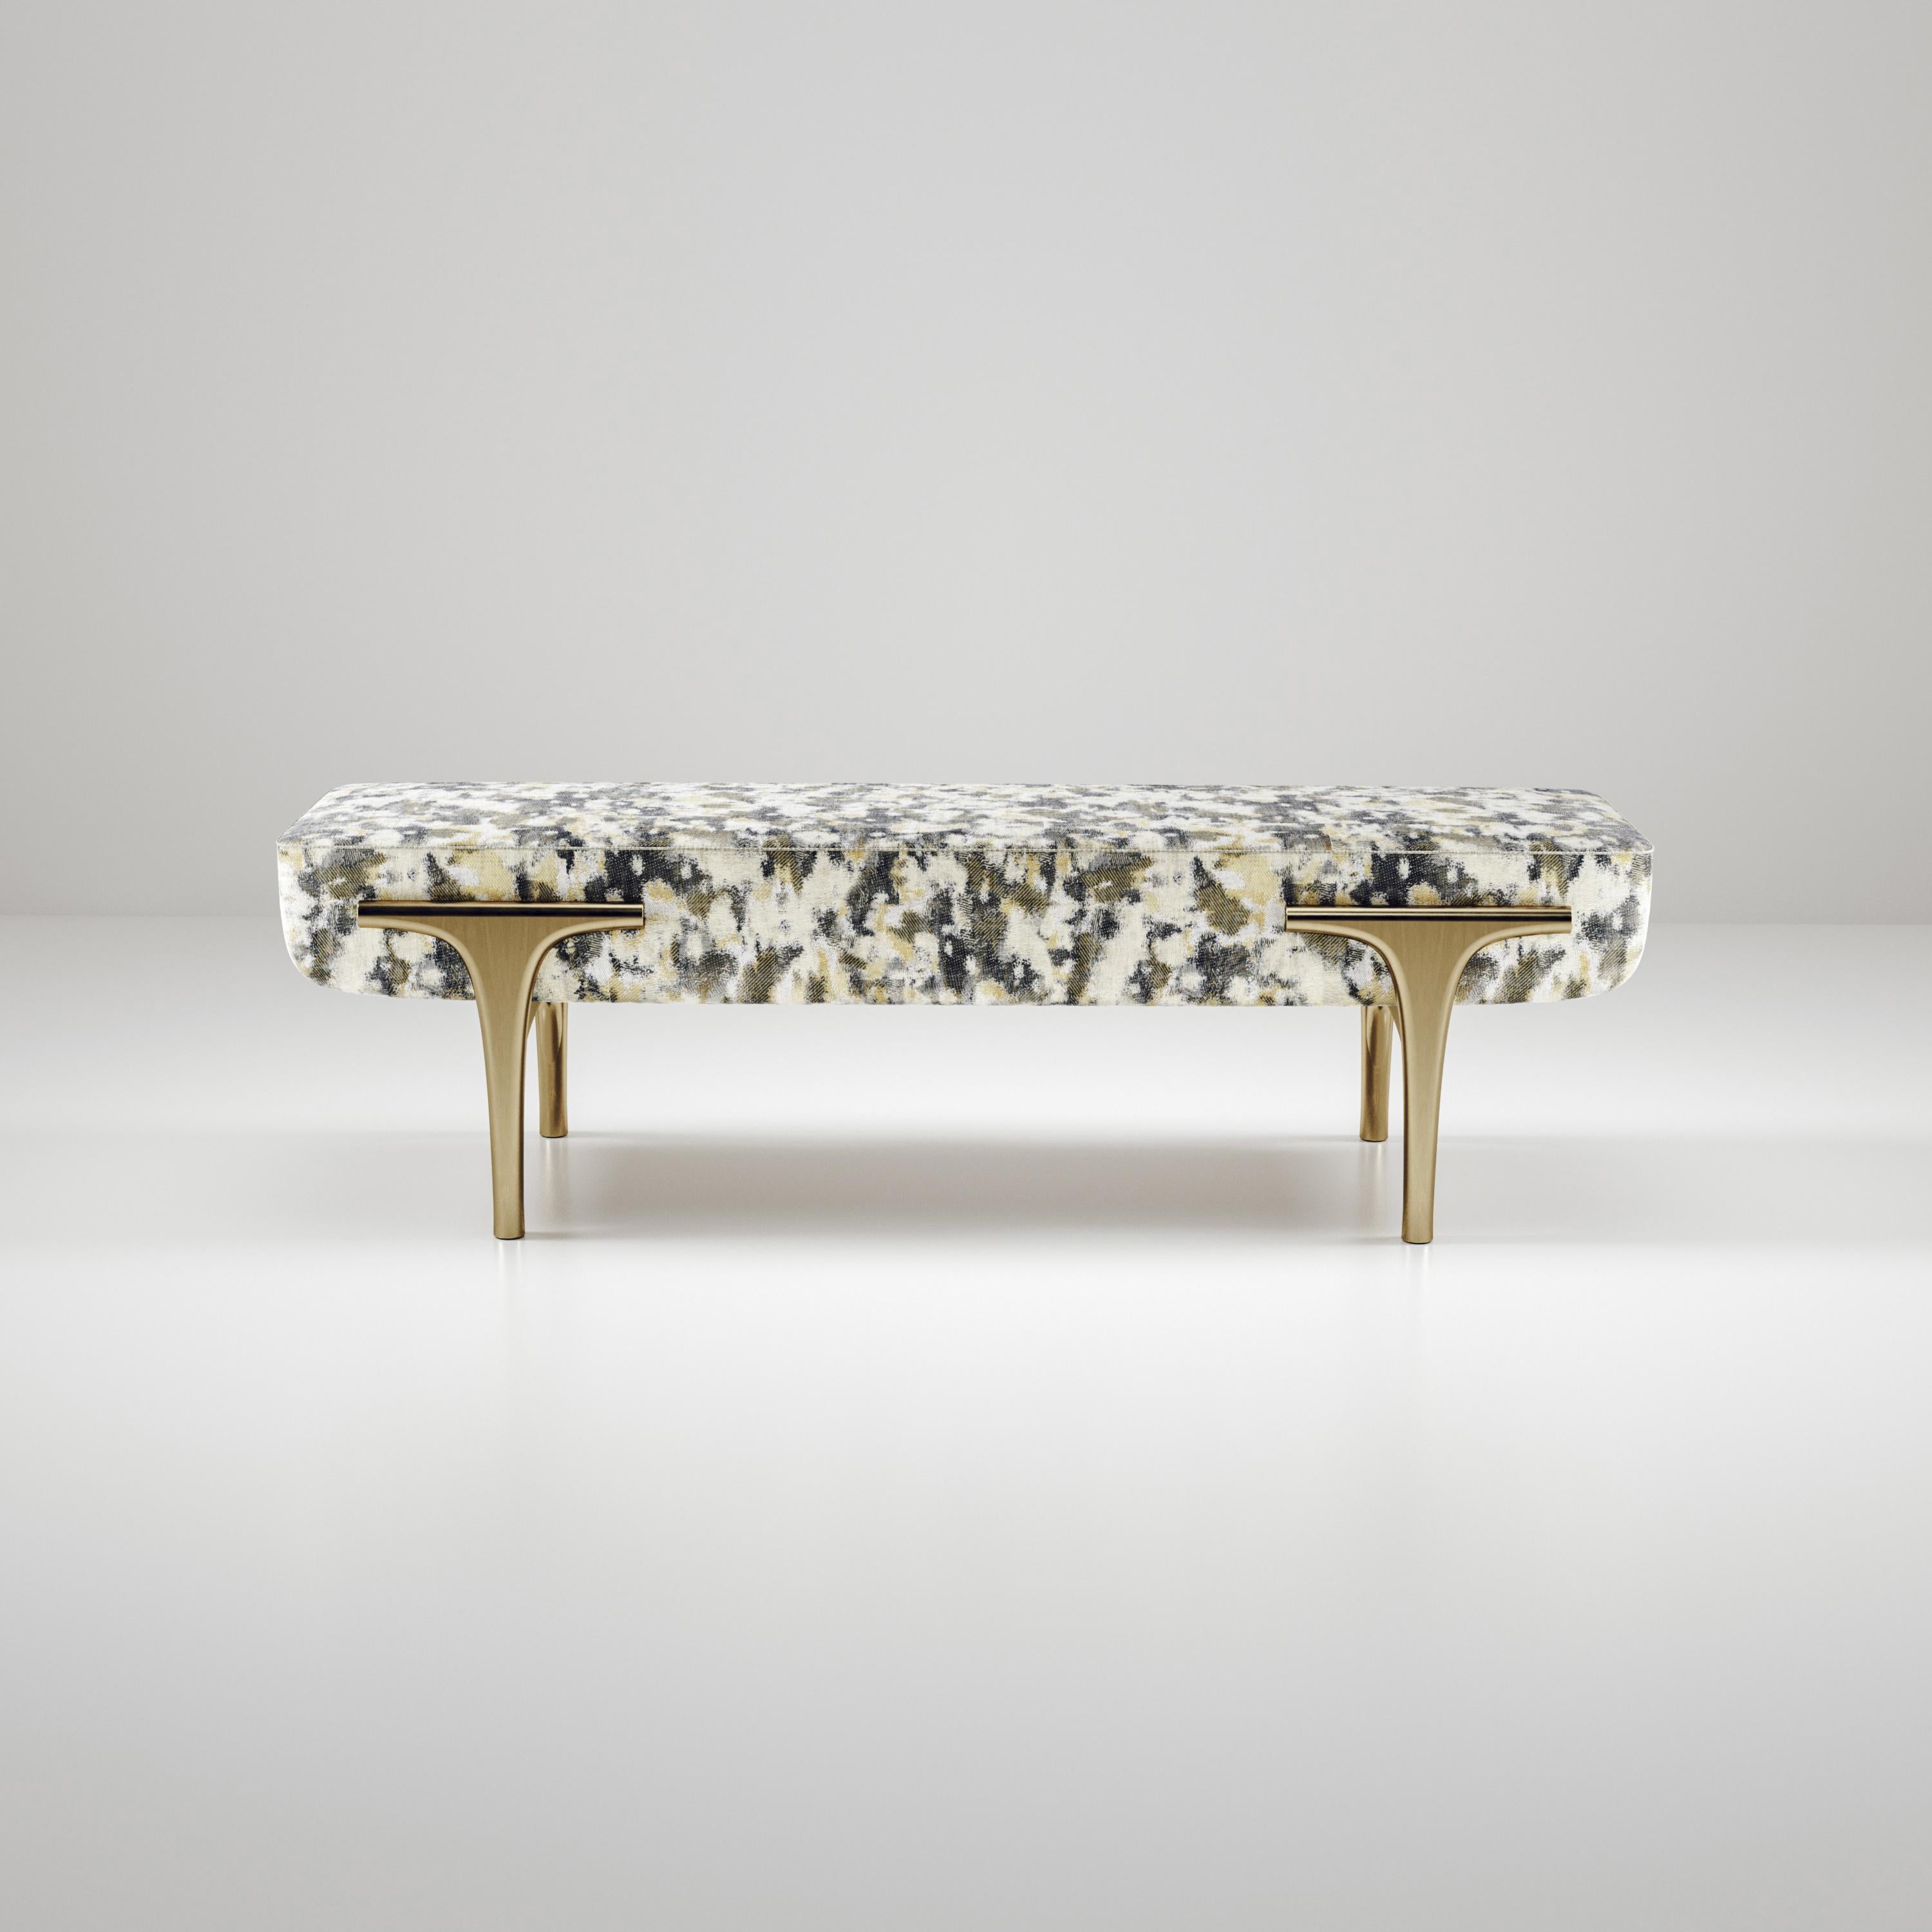 The Ramo Bench by R & Y Augousti is an elegant and versatile piece. The upholstered piece provides comfort while retaining a unique aesthetic with the bronze-patina brass frame and details. The camouflage pattern is a Pierre Frey fabric. This